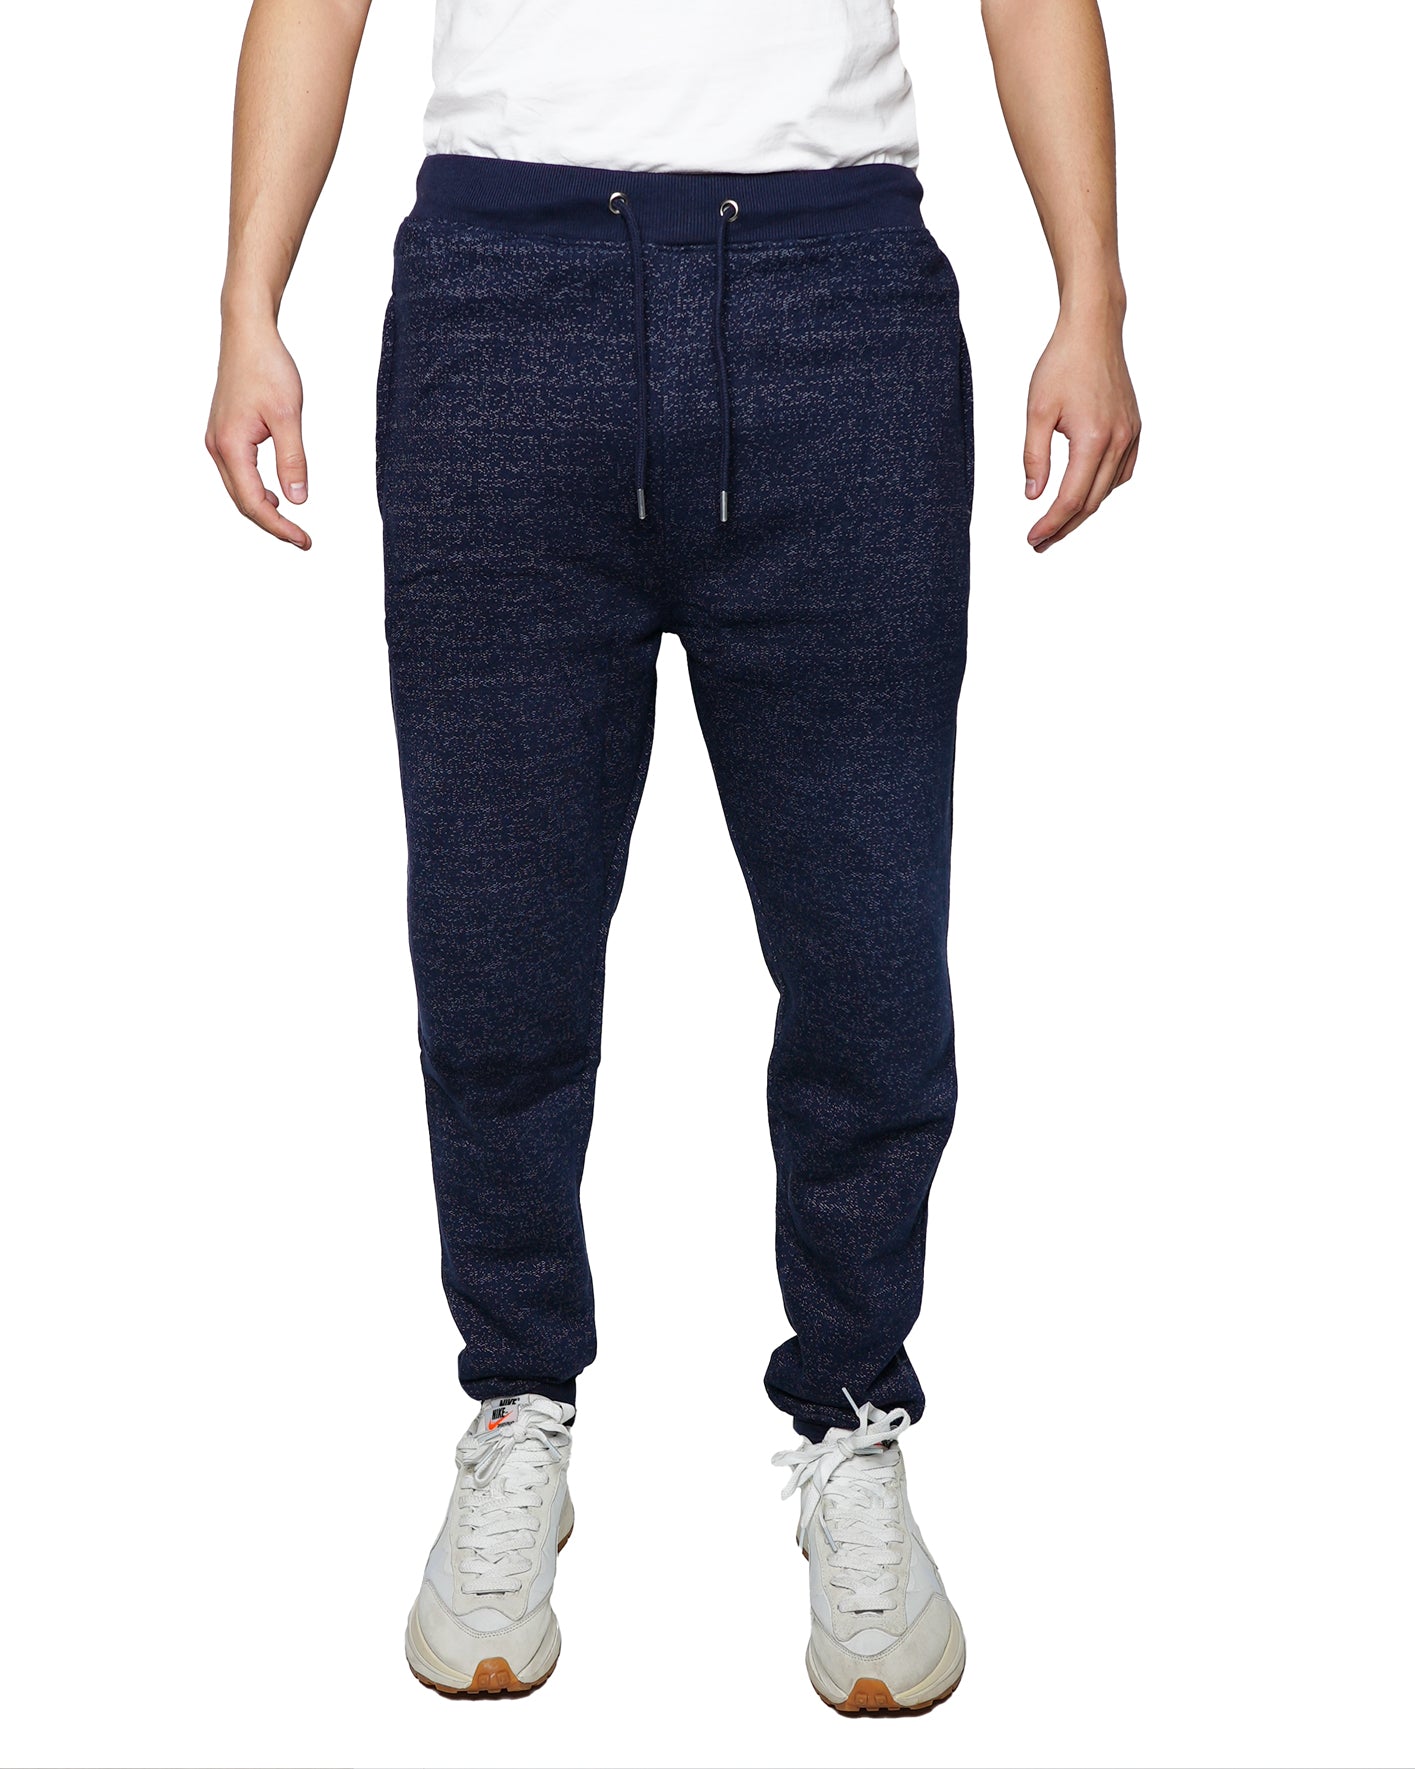 Navy Dotted Print Joggers - Slim Fit